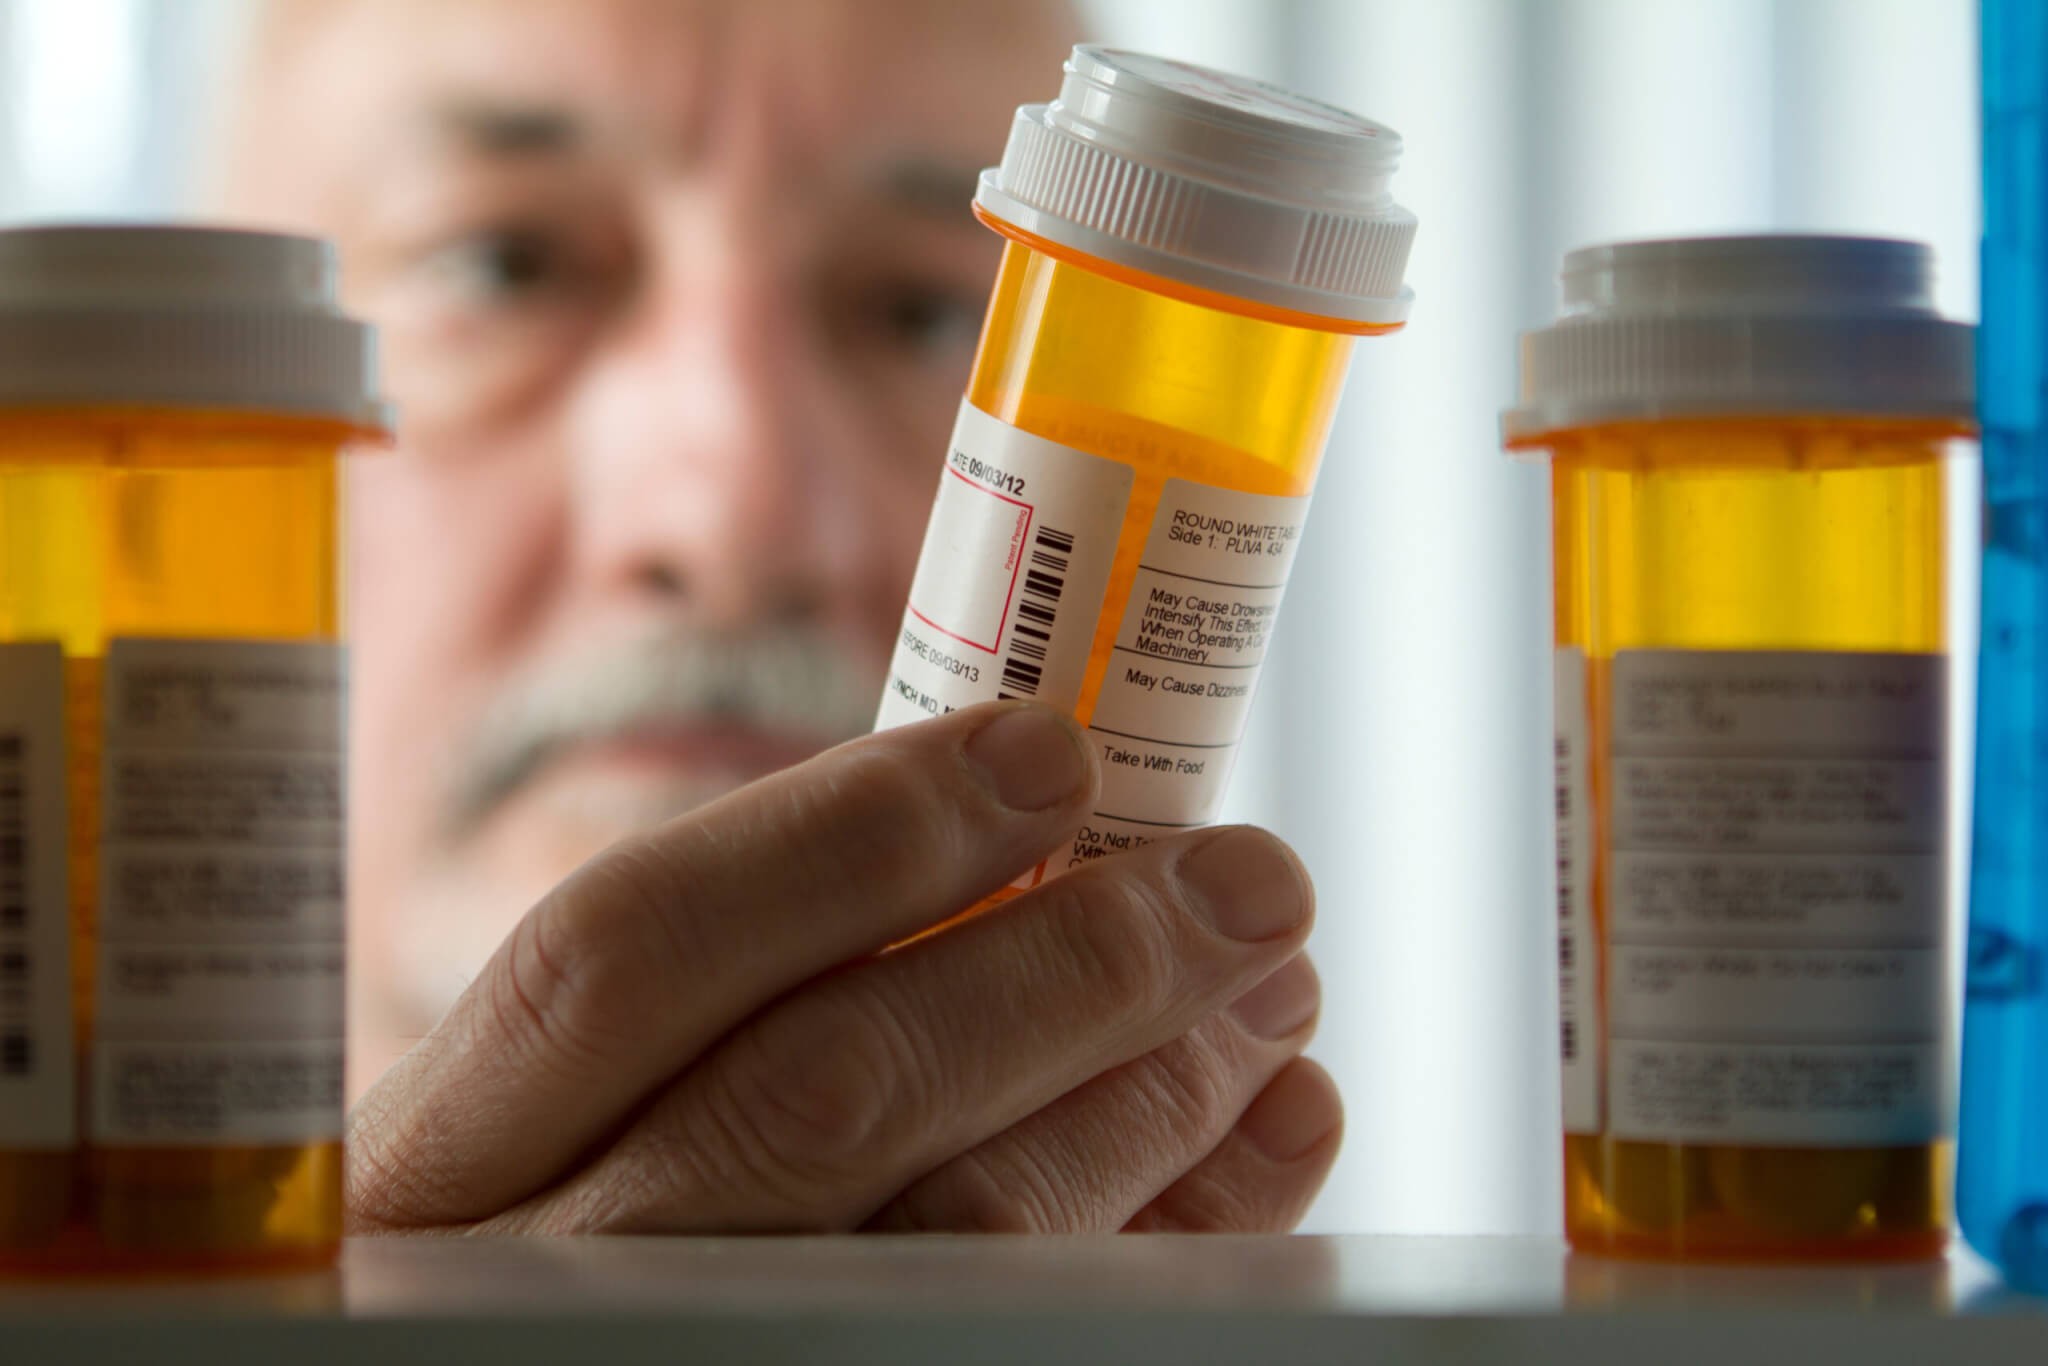 Man reaching for prescription from medicine cabinet